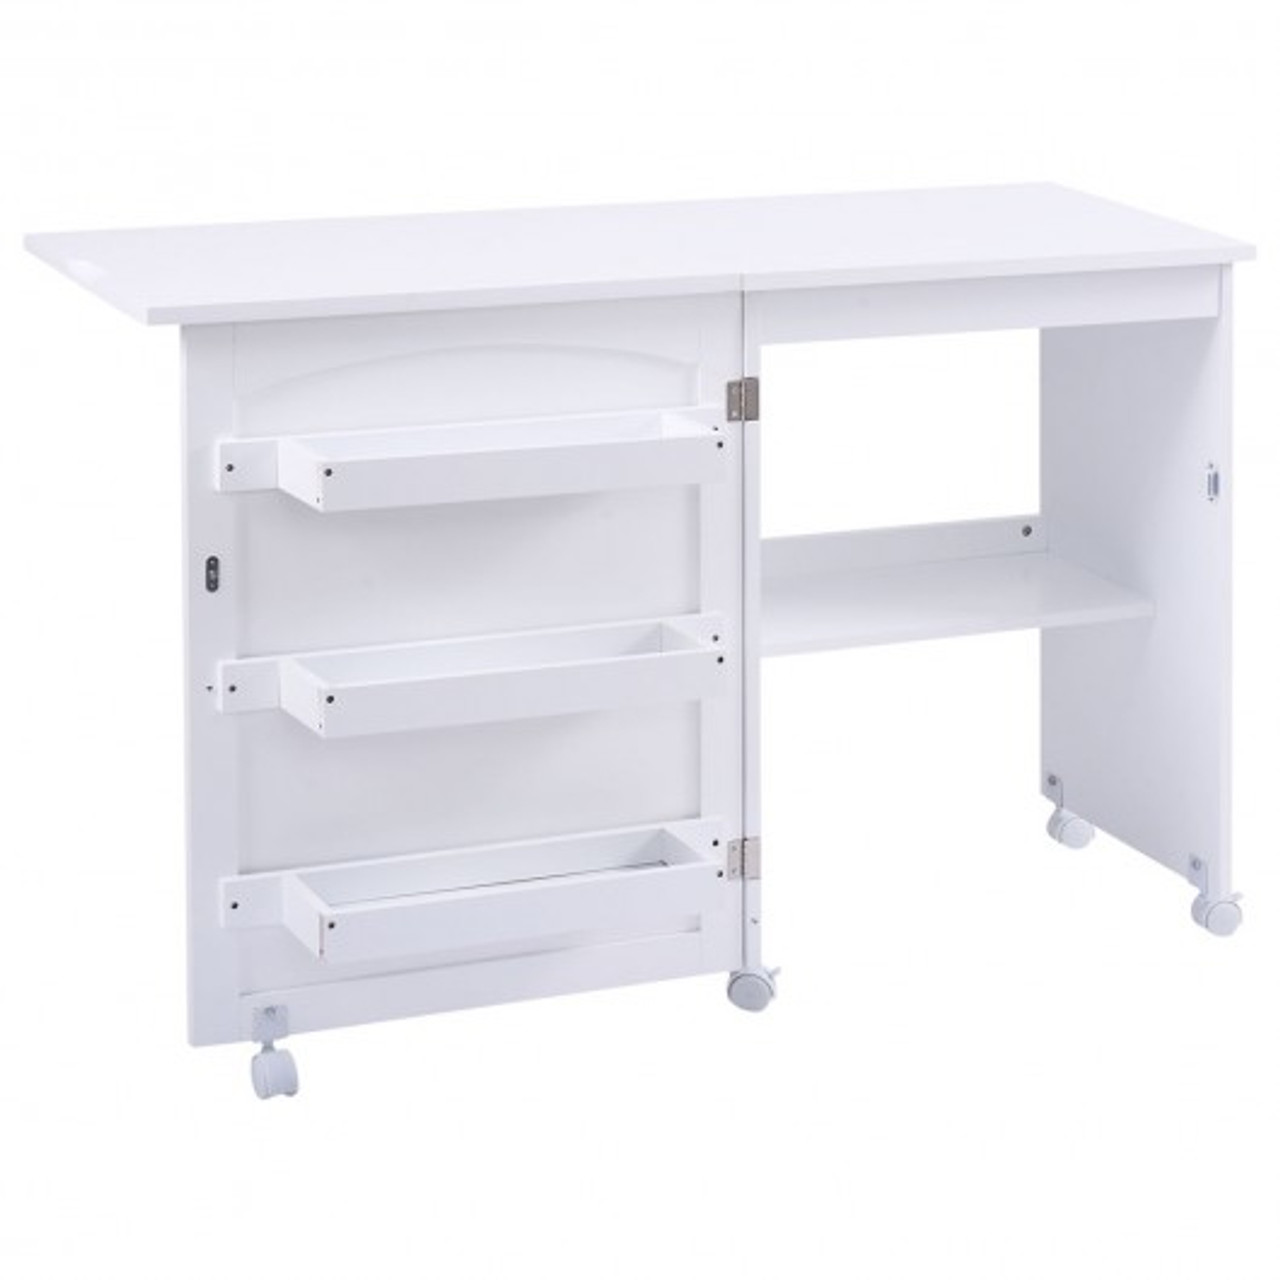 Gymax Folding Sewing Table Shelves Storage Cabinet Craft Cart W/Wheels  Large White/Natural